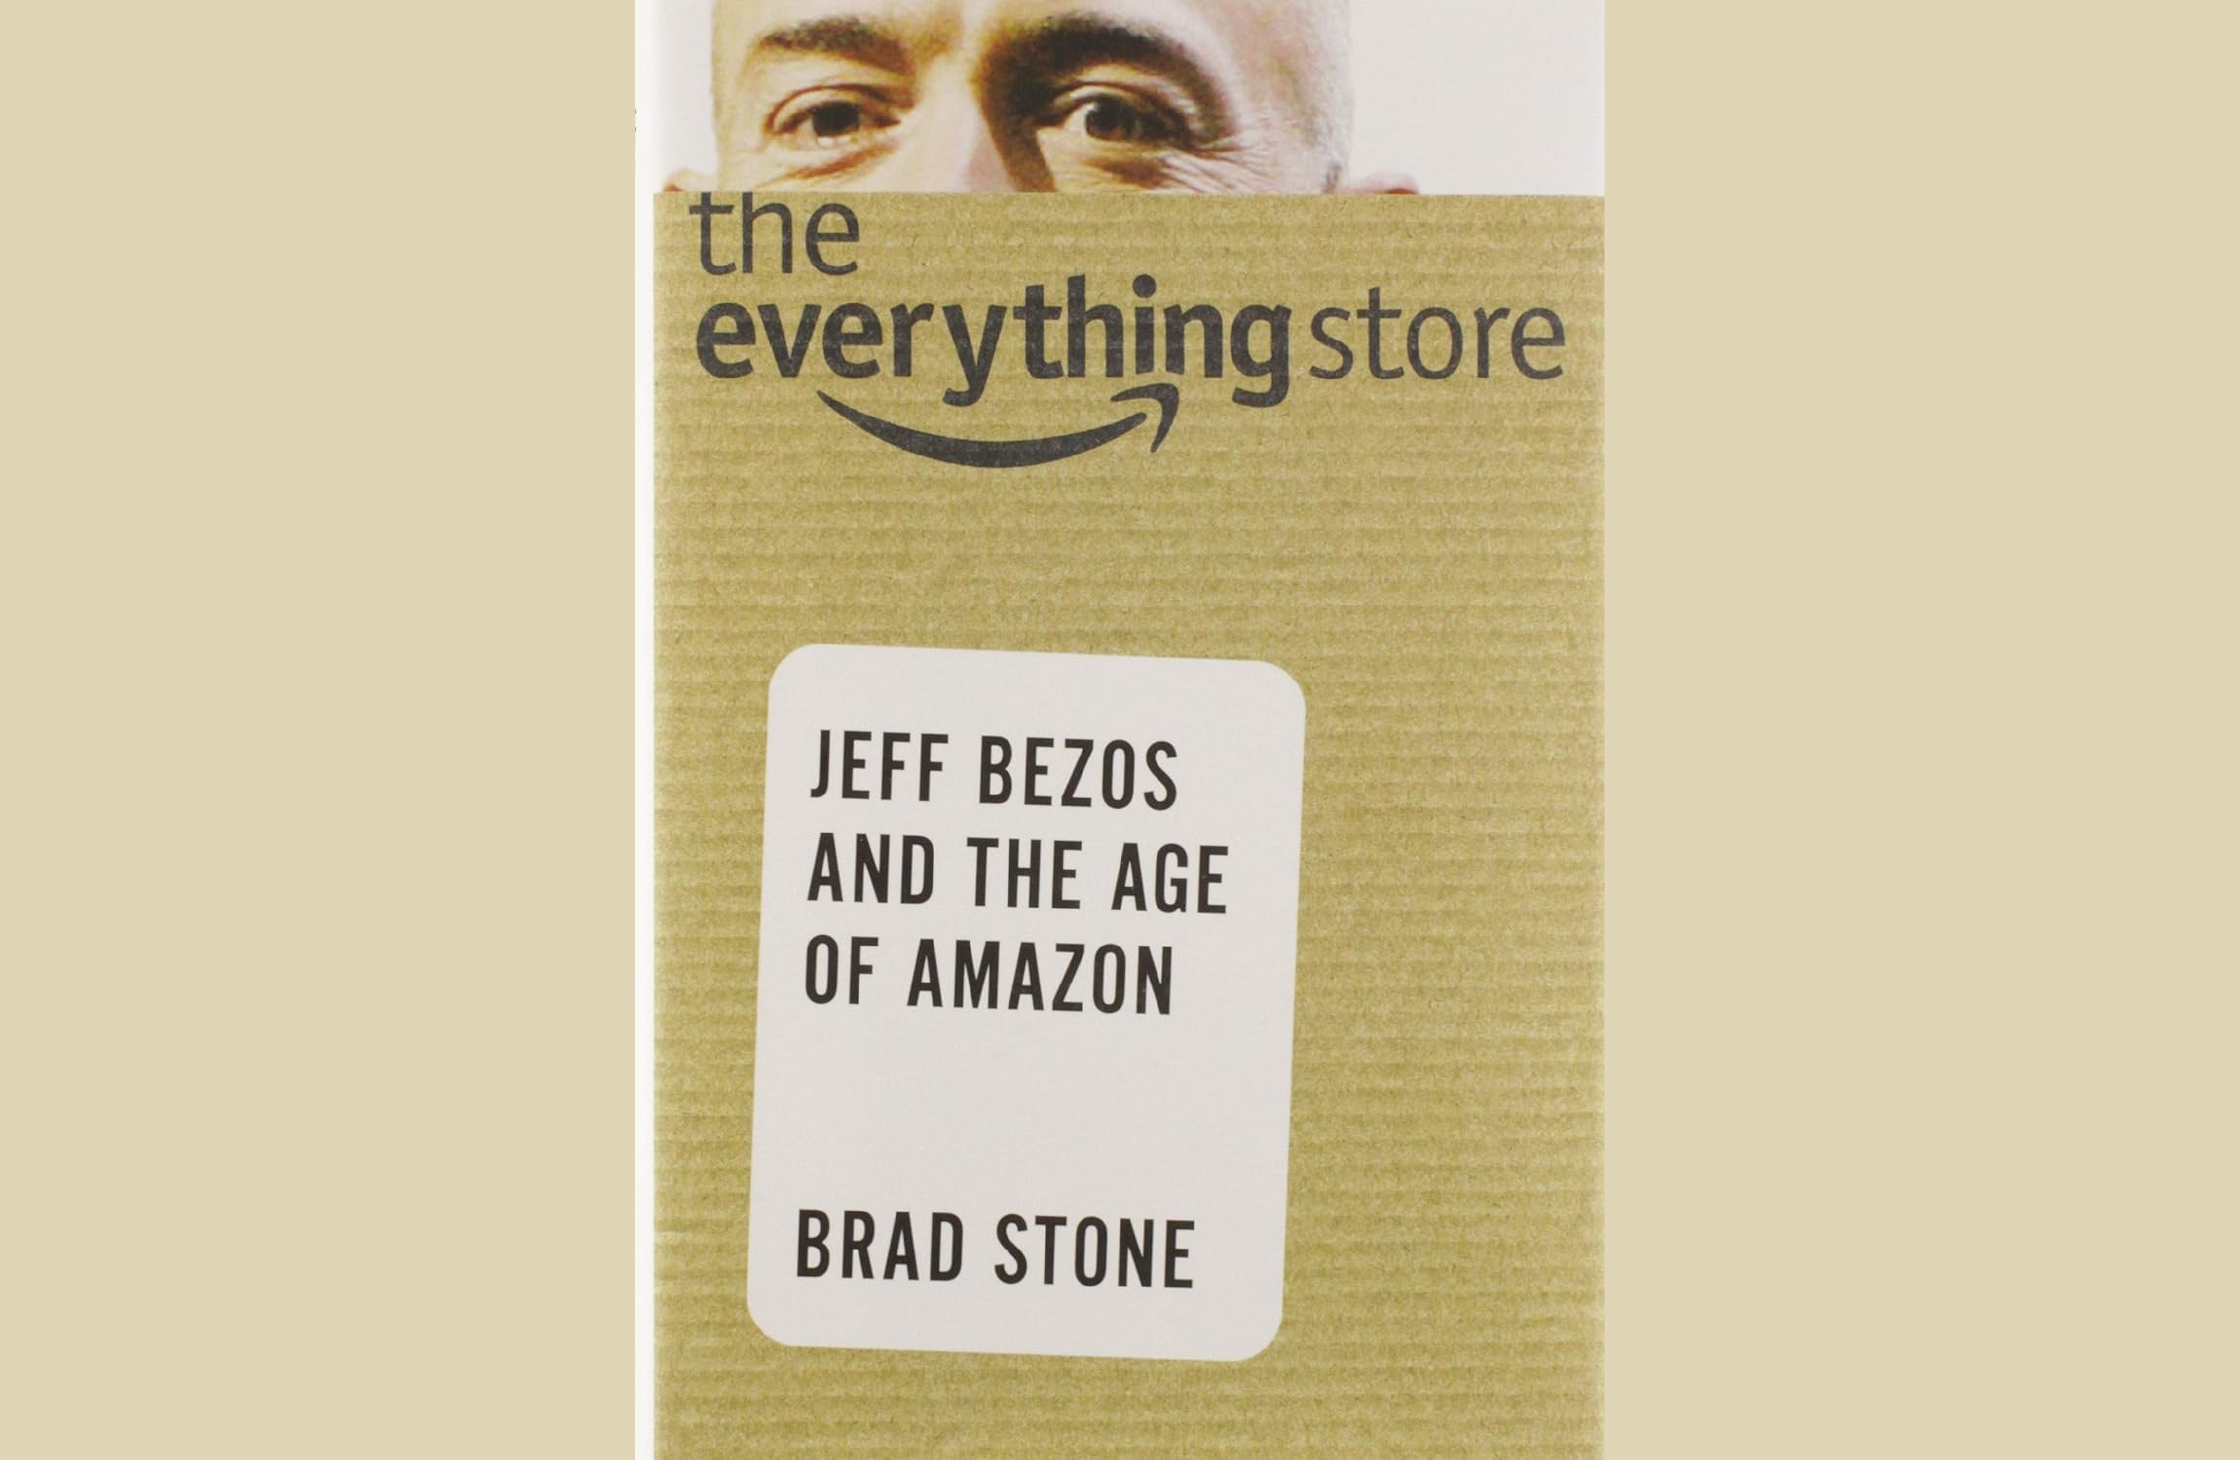 Summary: The Everything Store by Brad Stone